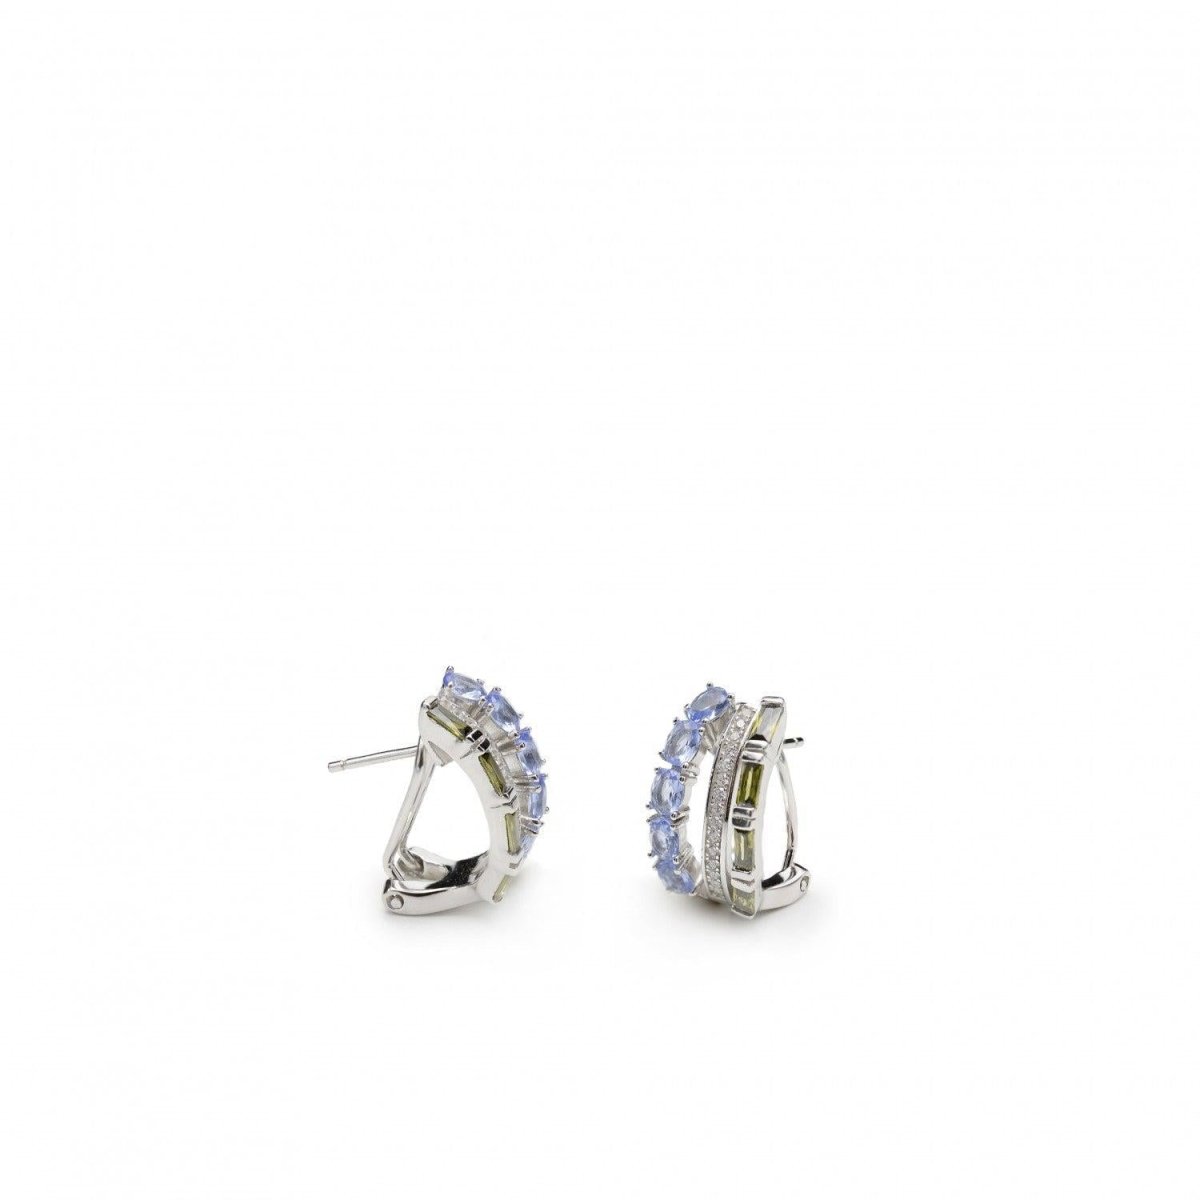 Earrings - Omega clasp earrings in small silver two-tone design and zirconia